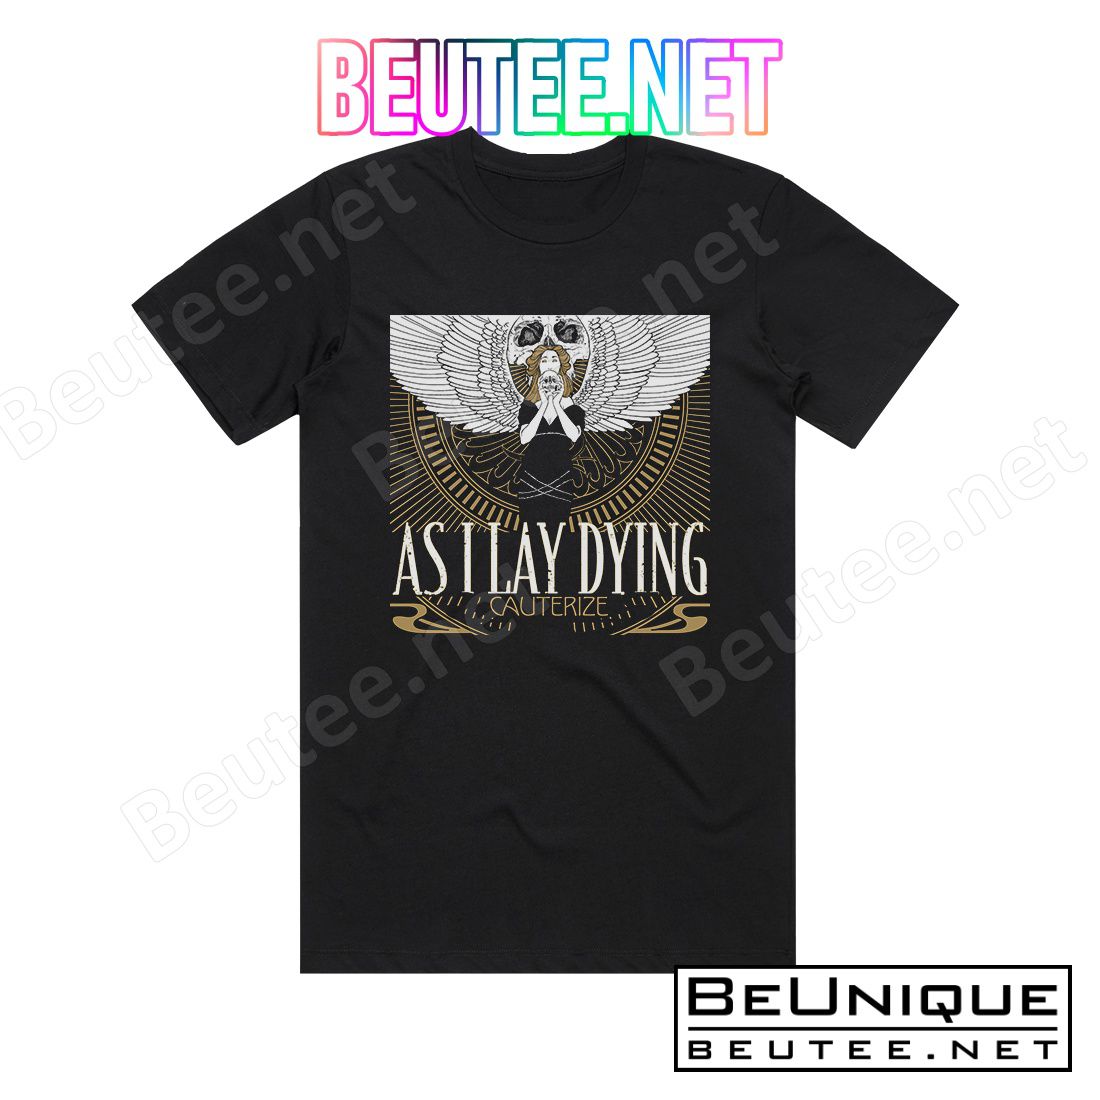 As I Lay Dying Cauterize Album Cover T-Shirt